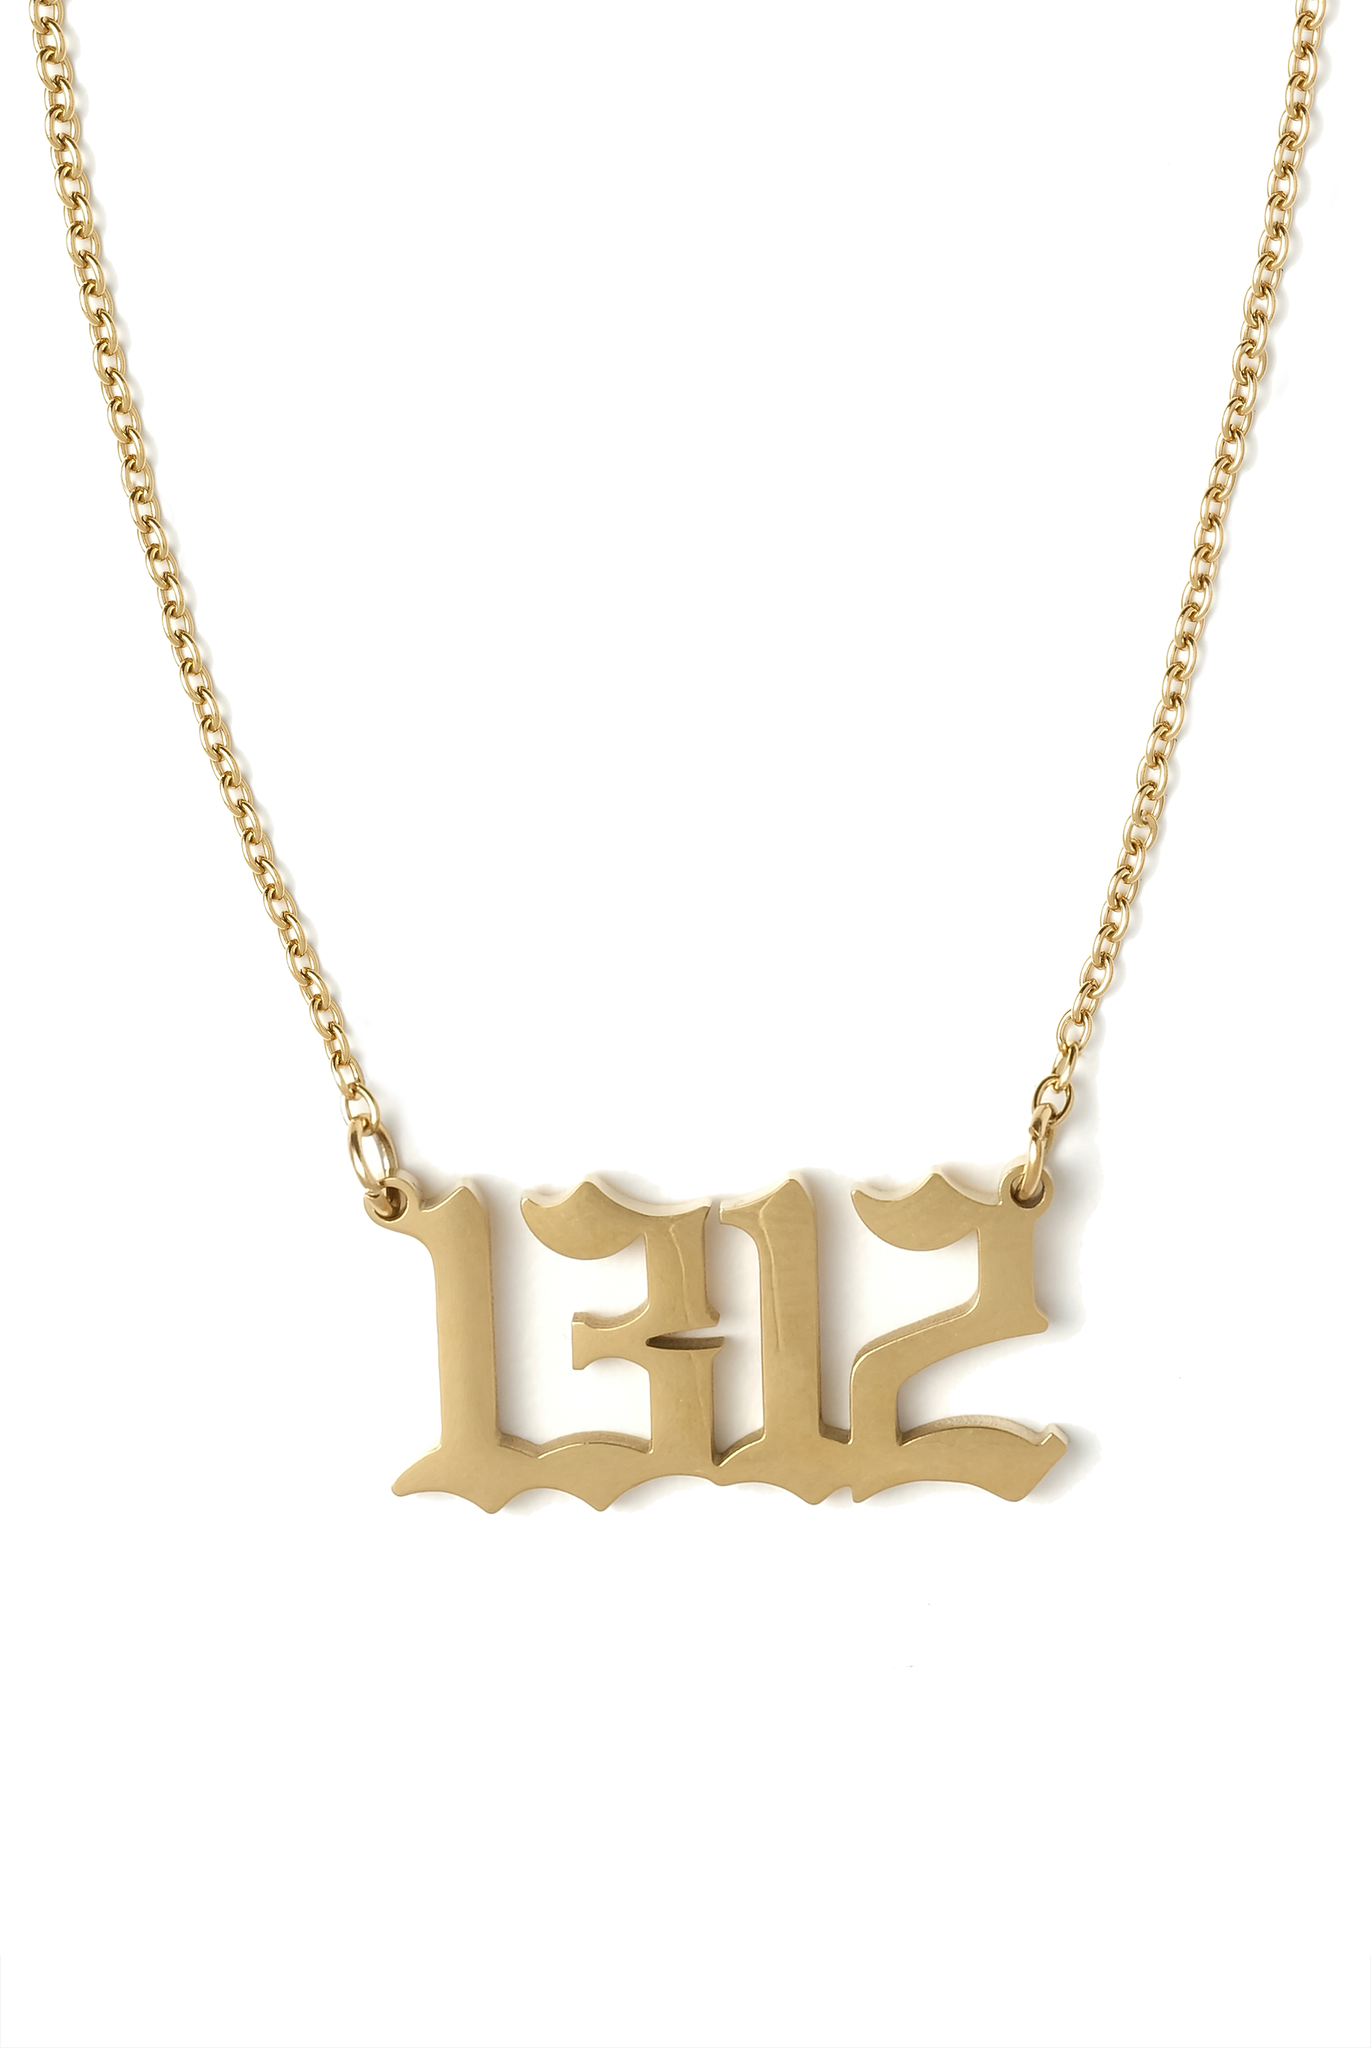 1312 necklace